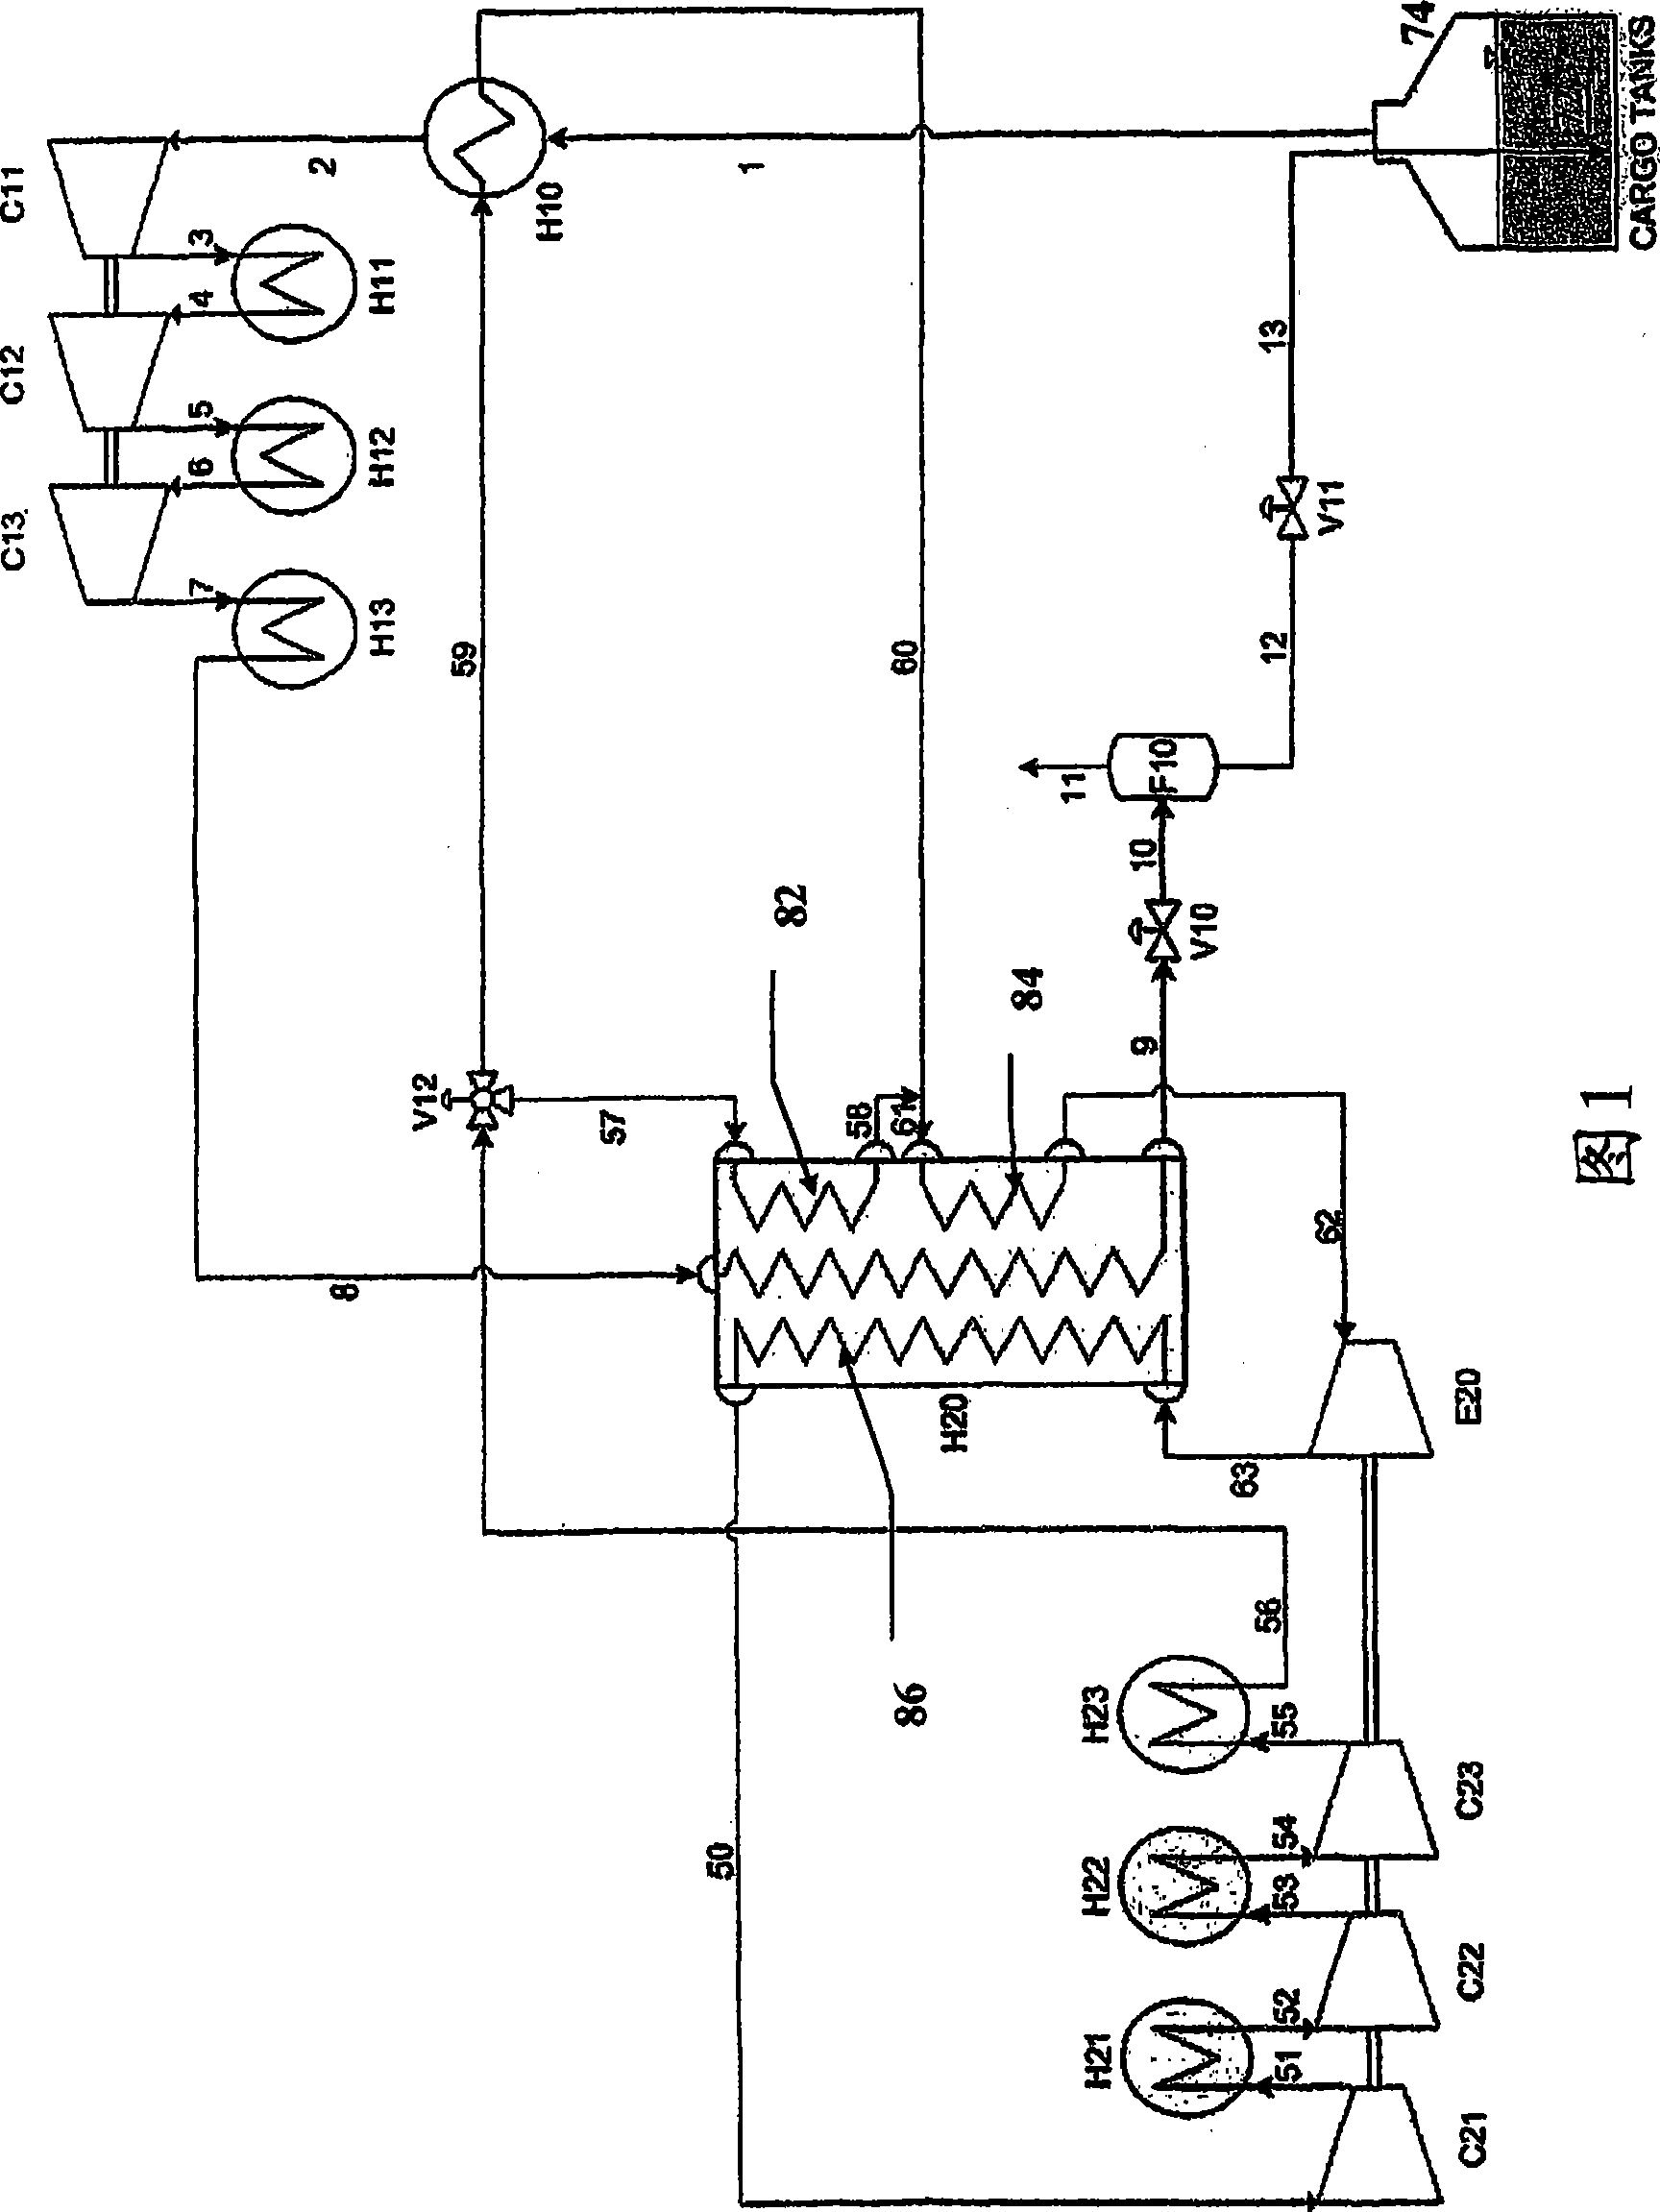 Method and apparatus for pre-heating LNG boil-off gas to ambient temperature prior to compression in a reliquefaction system